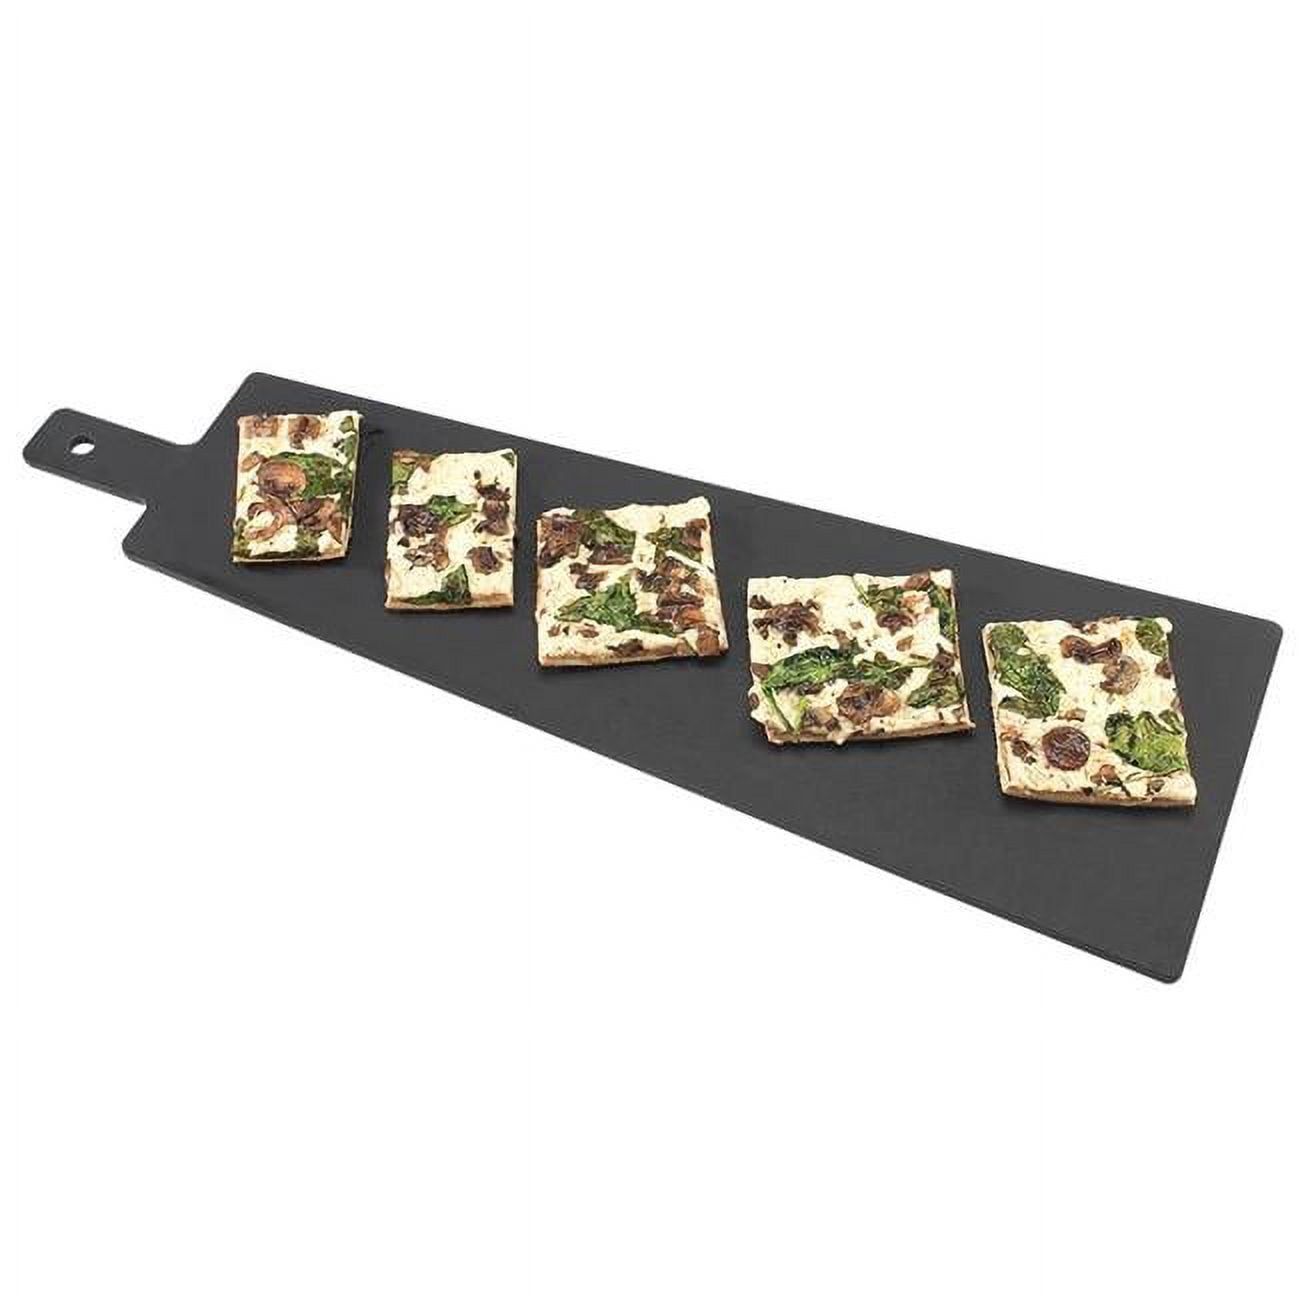 Picture of Cal Mil 1535-24-13 Black Trapezoid Flat Bread Serving & Display Board with Handle - 23.625 x 8 x .25 in.